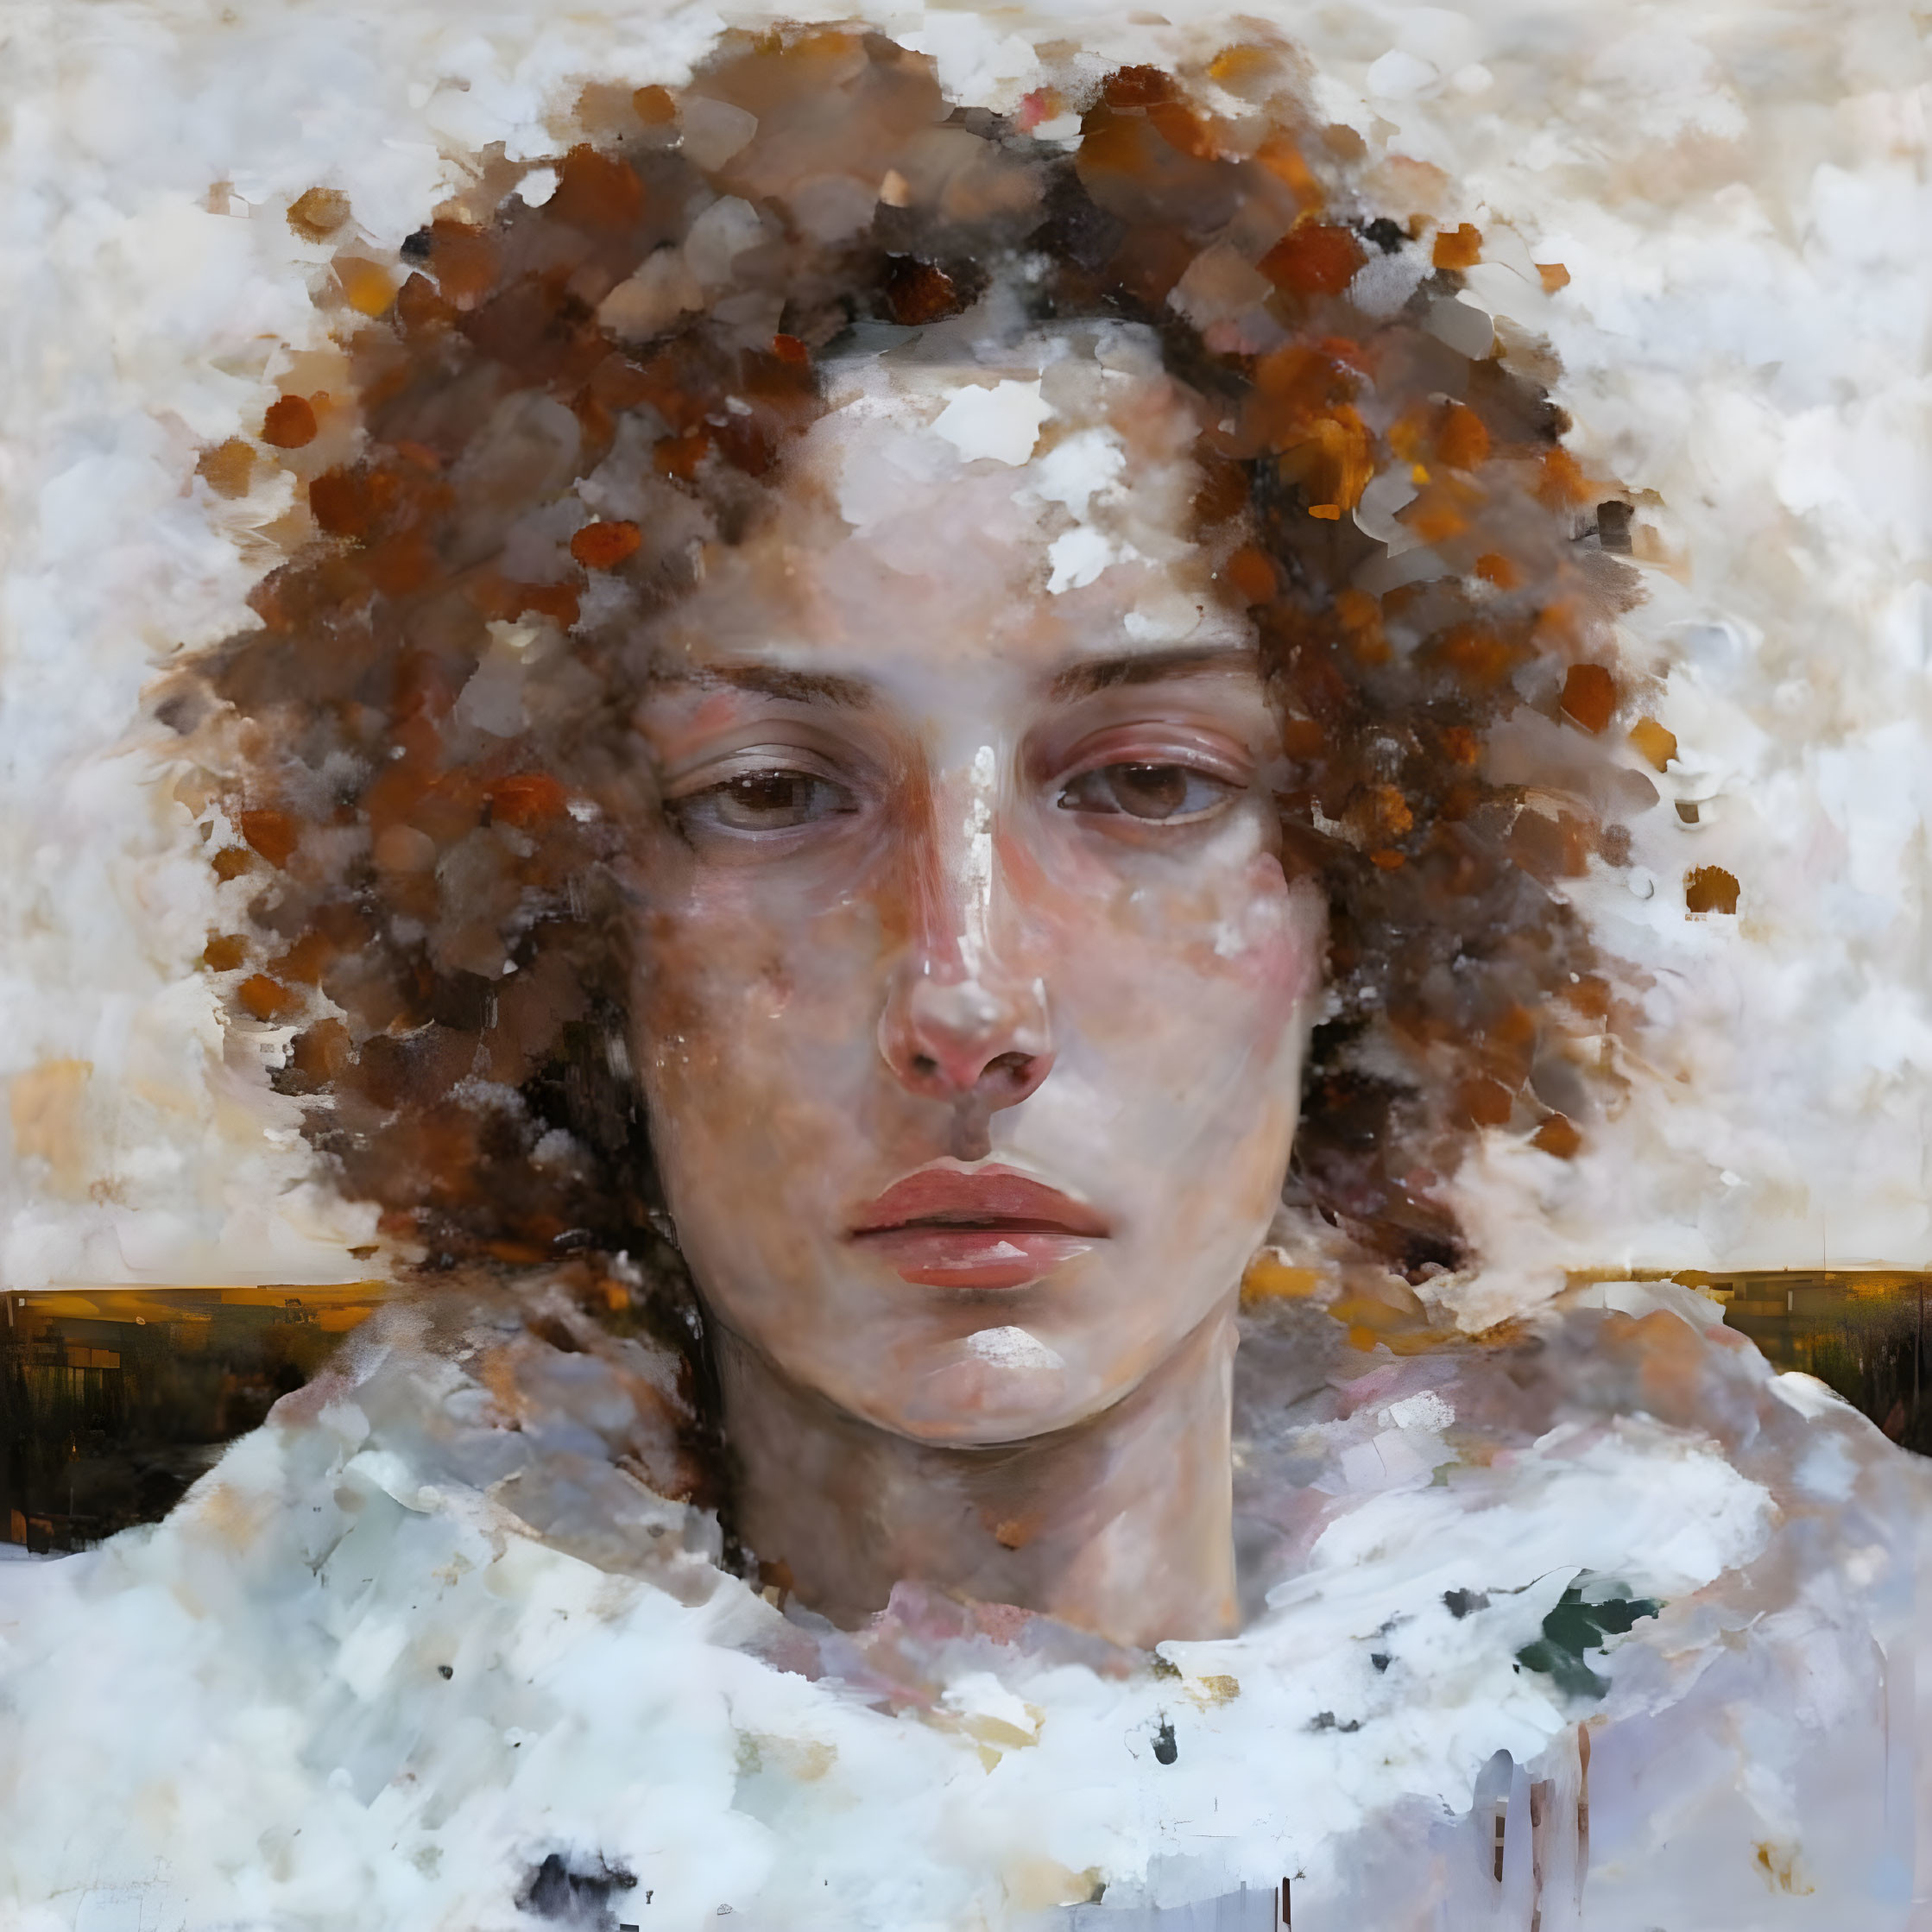 Portrait of a person with abstract pixelated hair and warm tones, featuring a contemplative expression and white